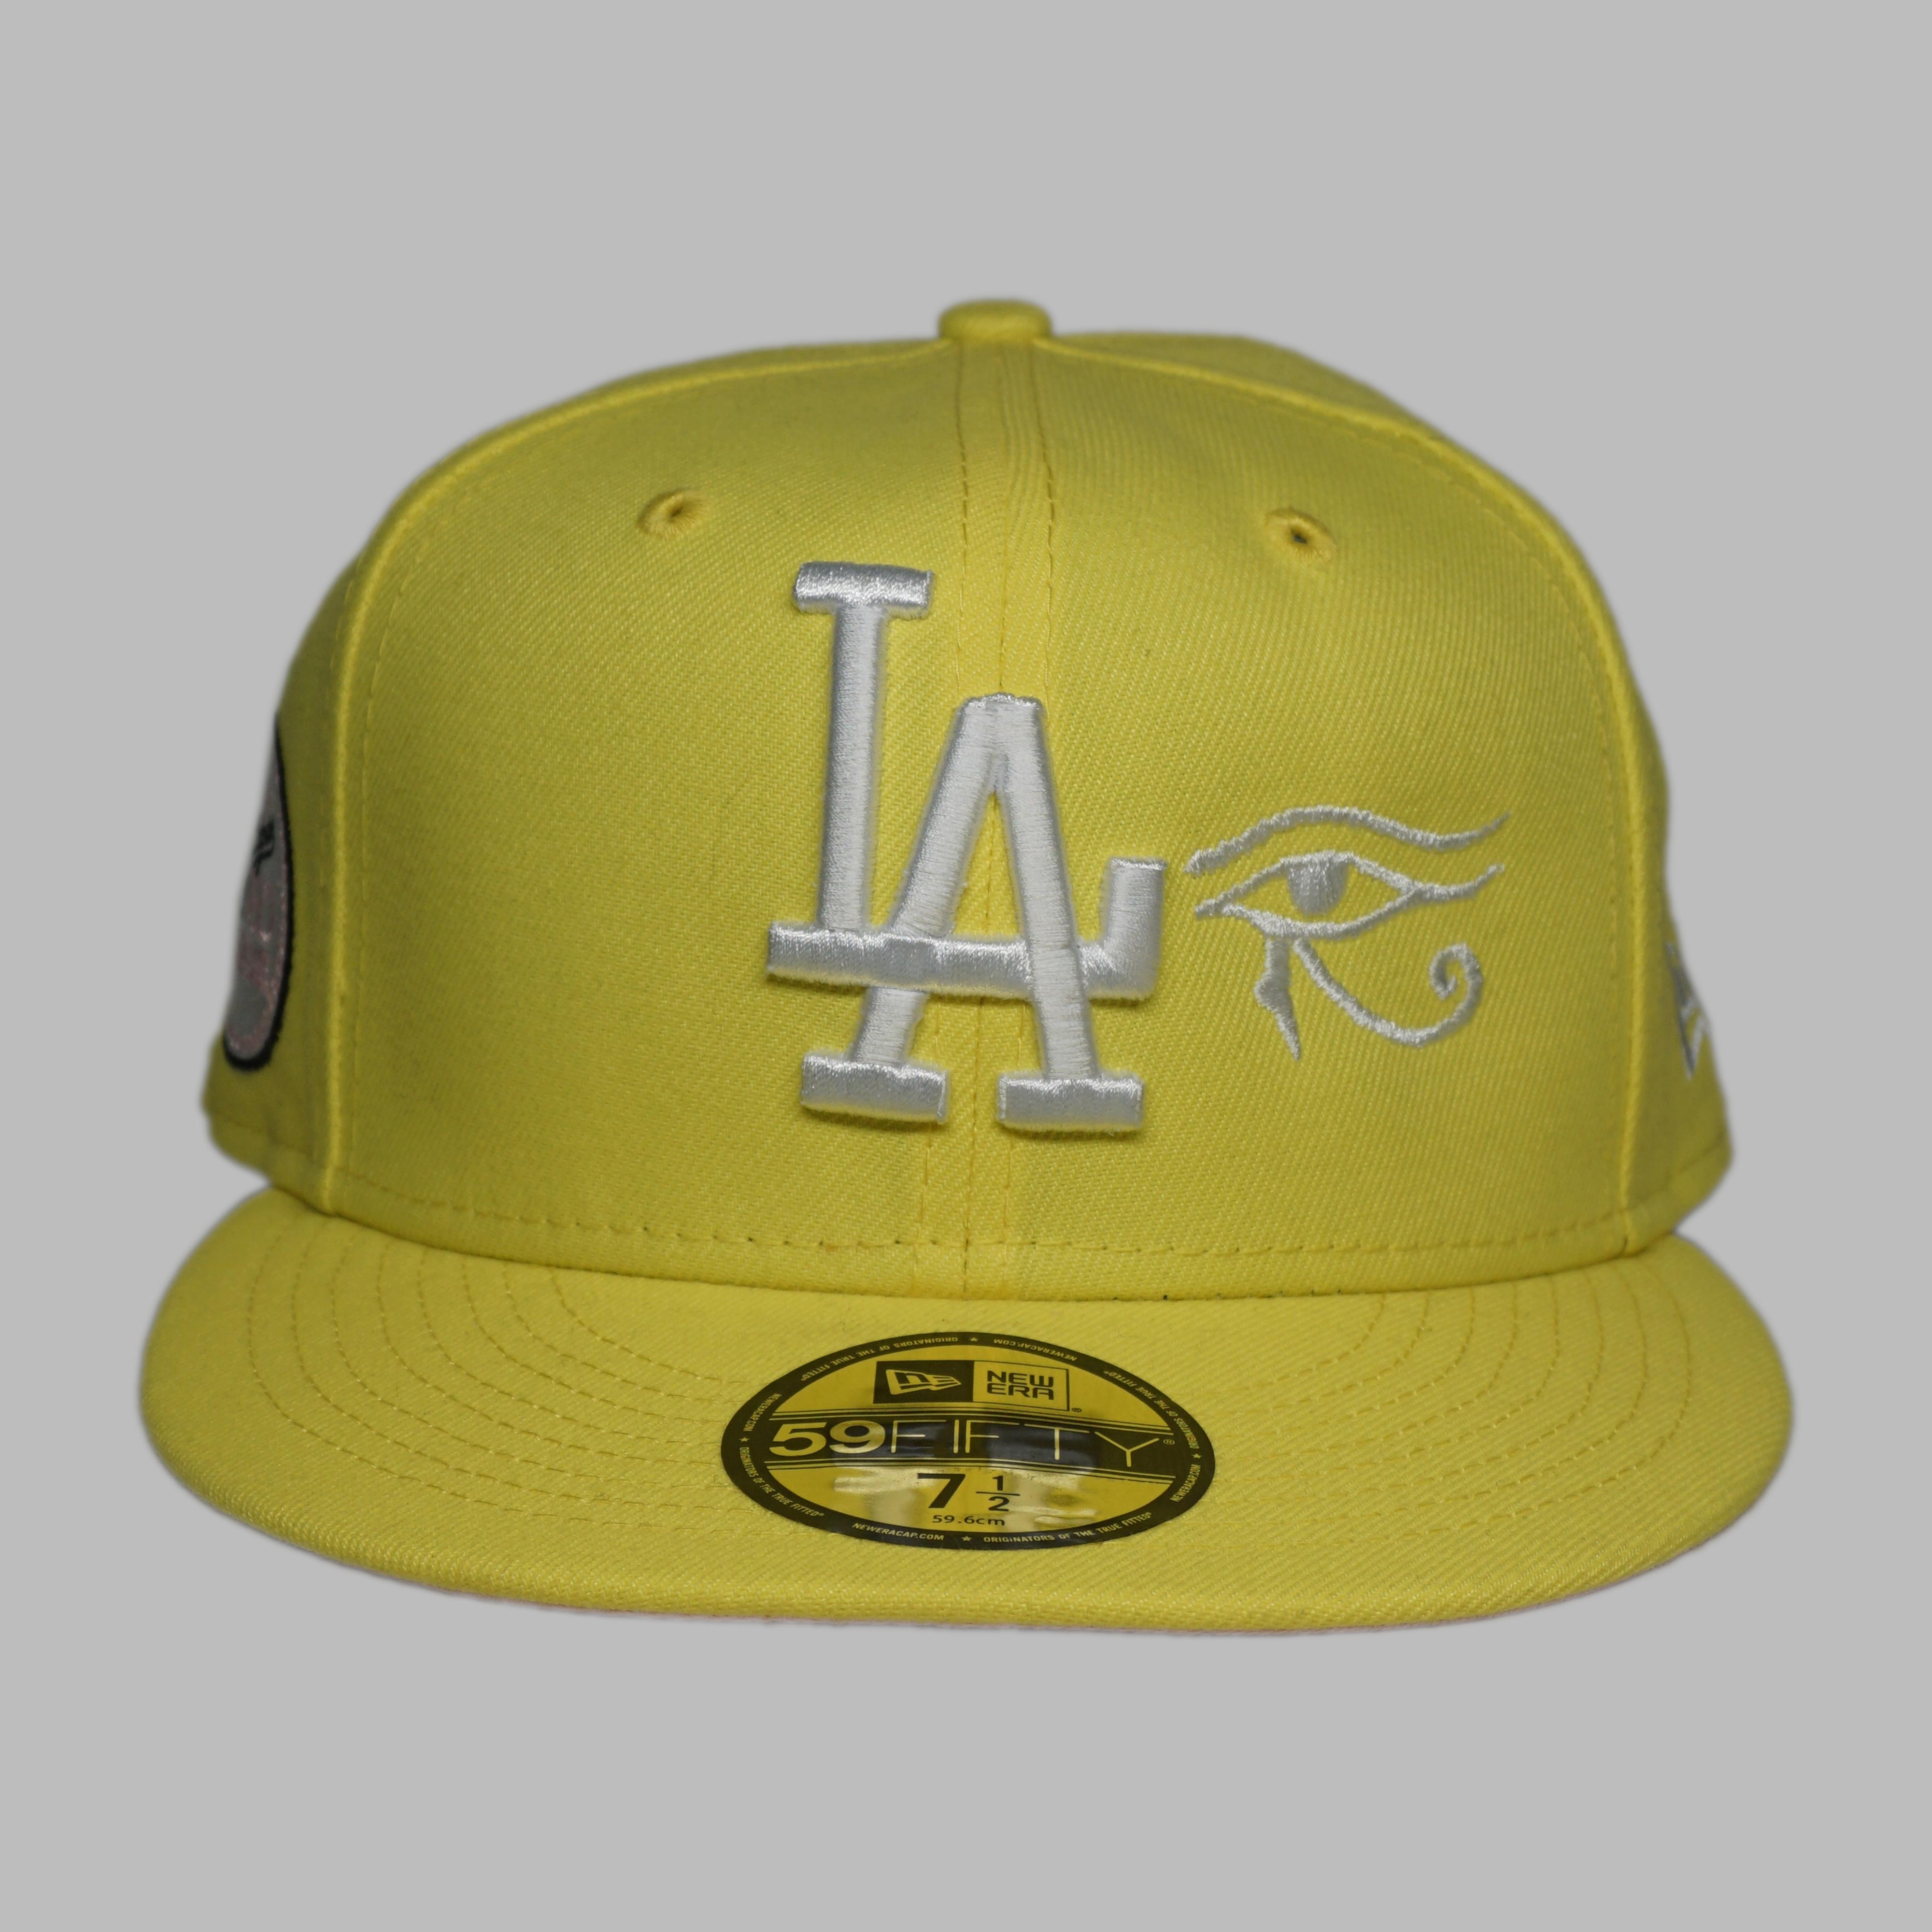 YELLOW BEYOND FITTED (size 7 1/2)